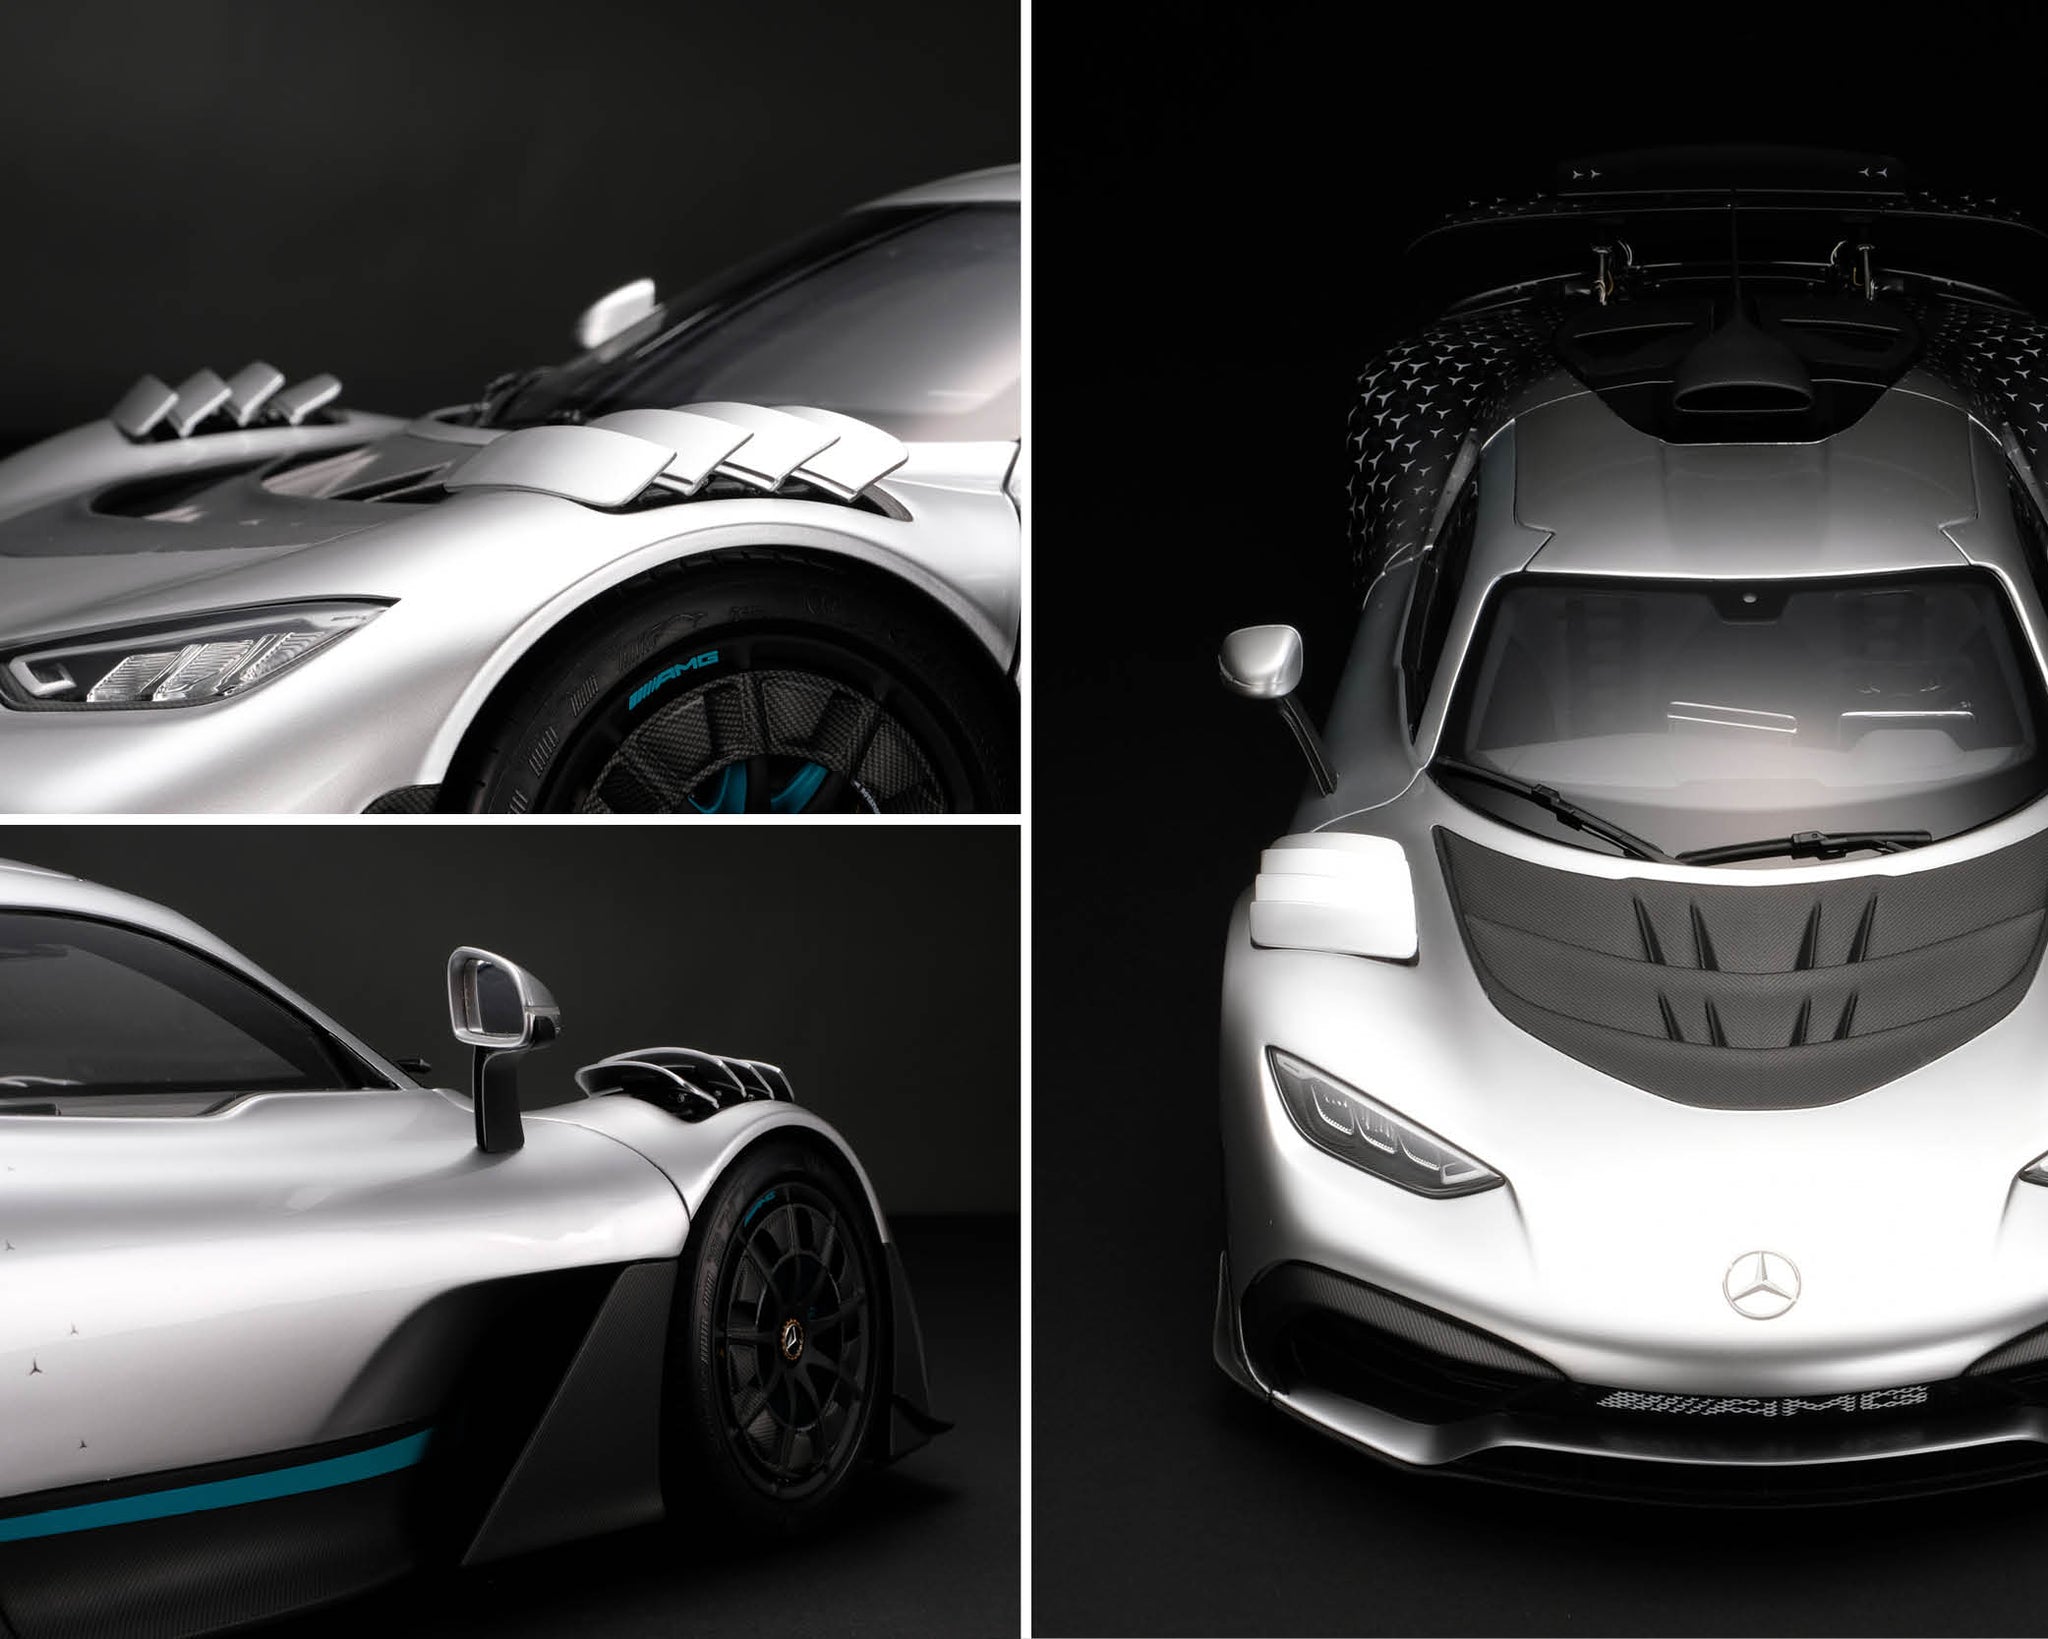 Mercedes-AMG ONE at 1:8 scale